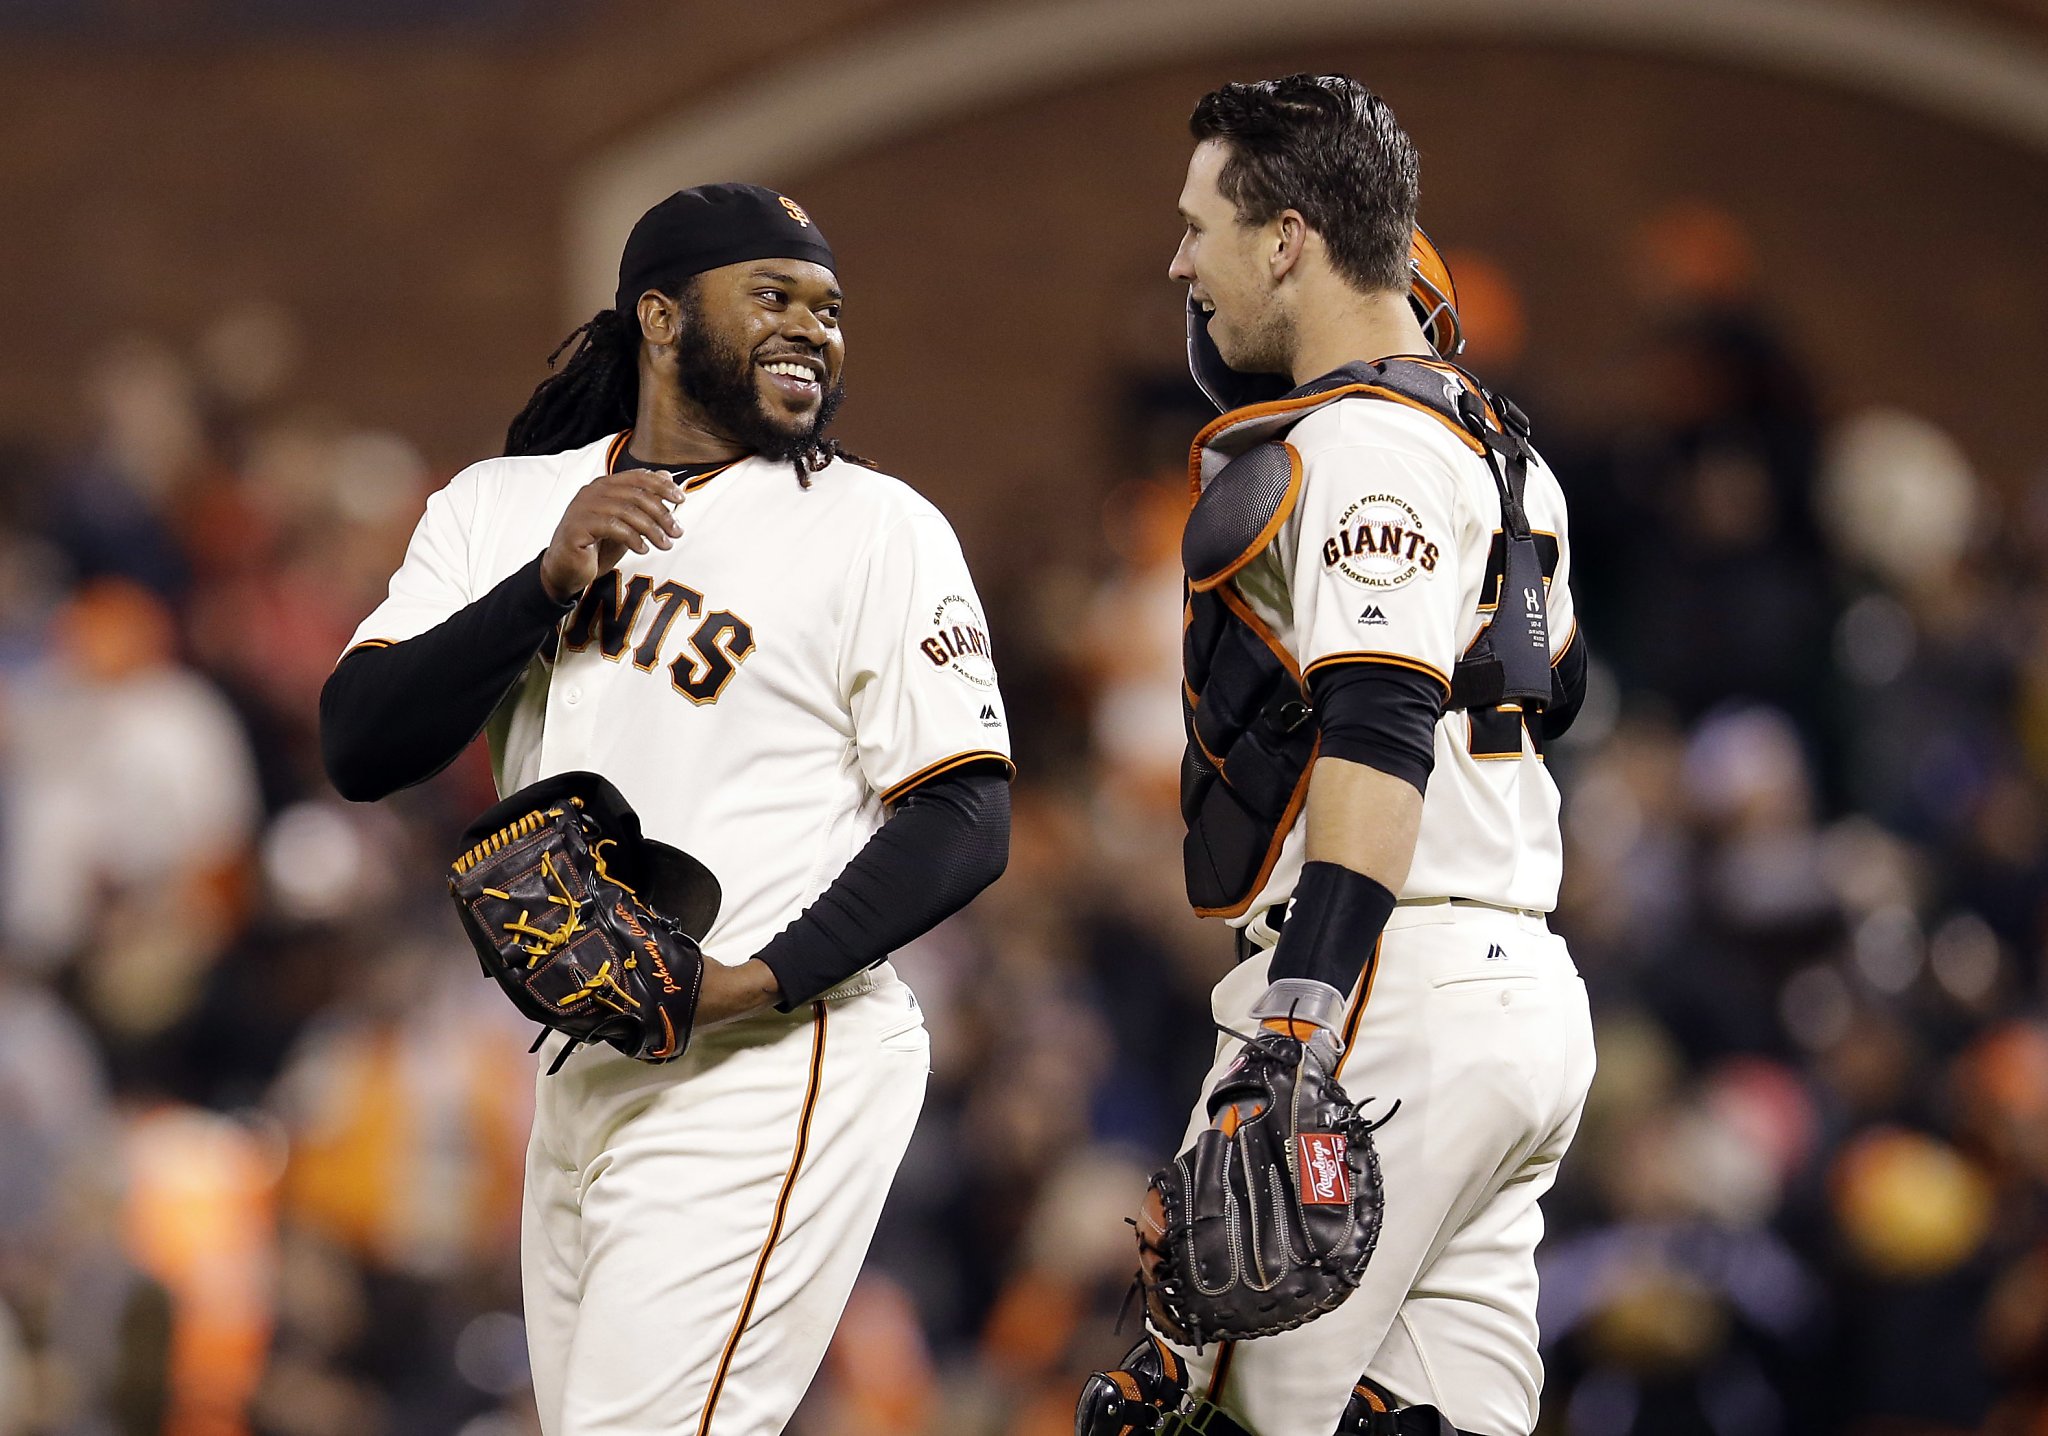 Giants welcome pitcher Johnny Cueto